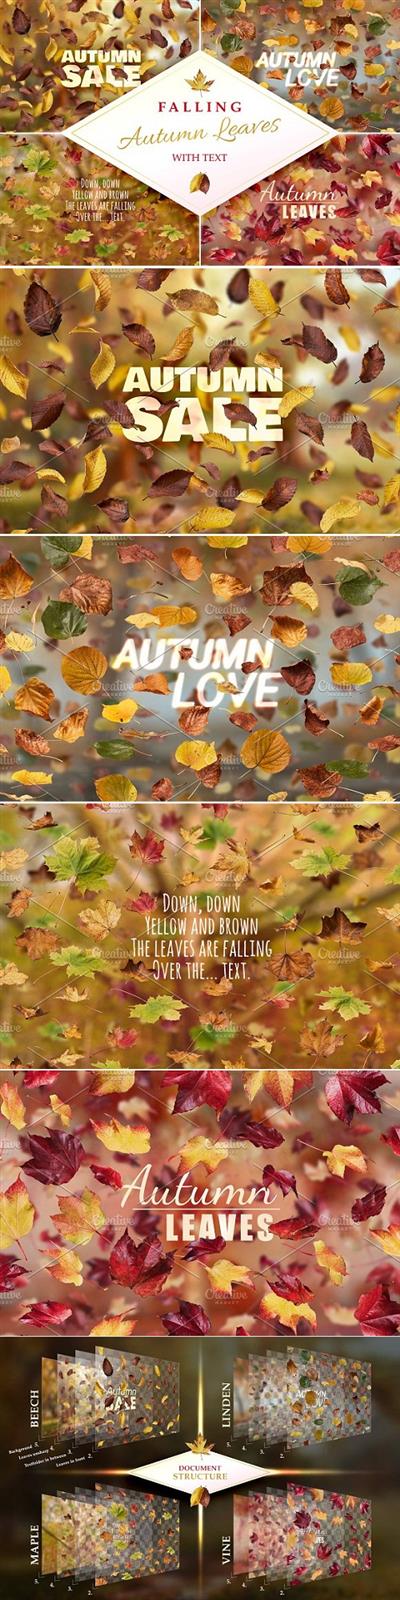 Falling Autumn Leaves with Text 449638